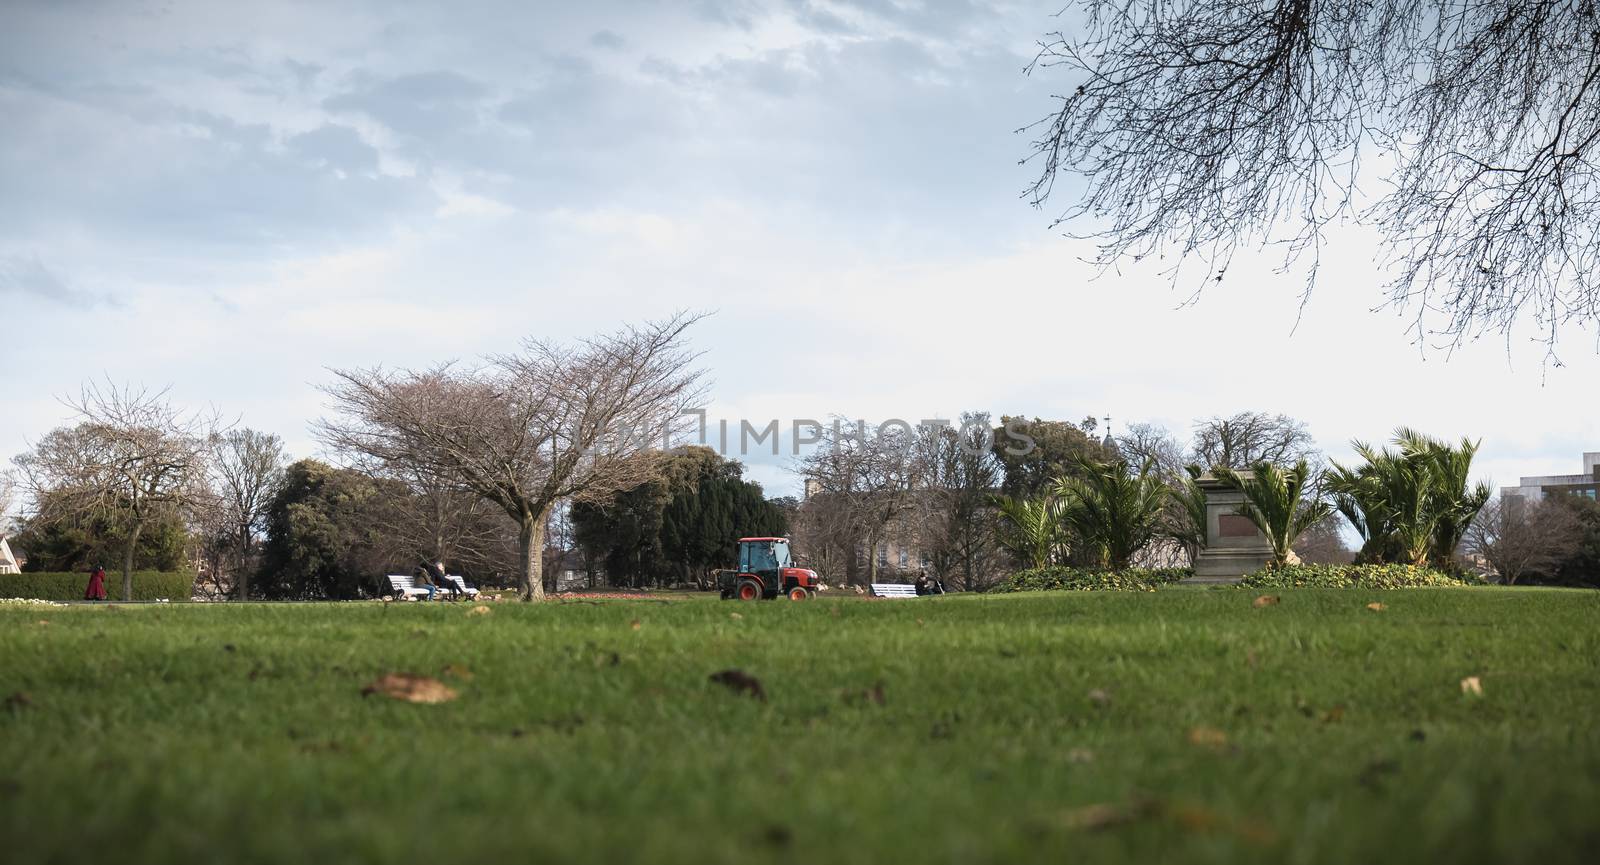 Gardeners moving by tractor on the lawns of Phoenix Park in Dubl by AtlanticEUROSTOXX